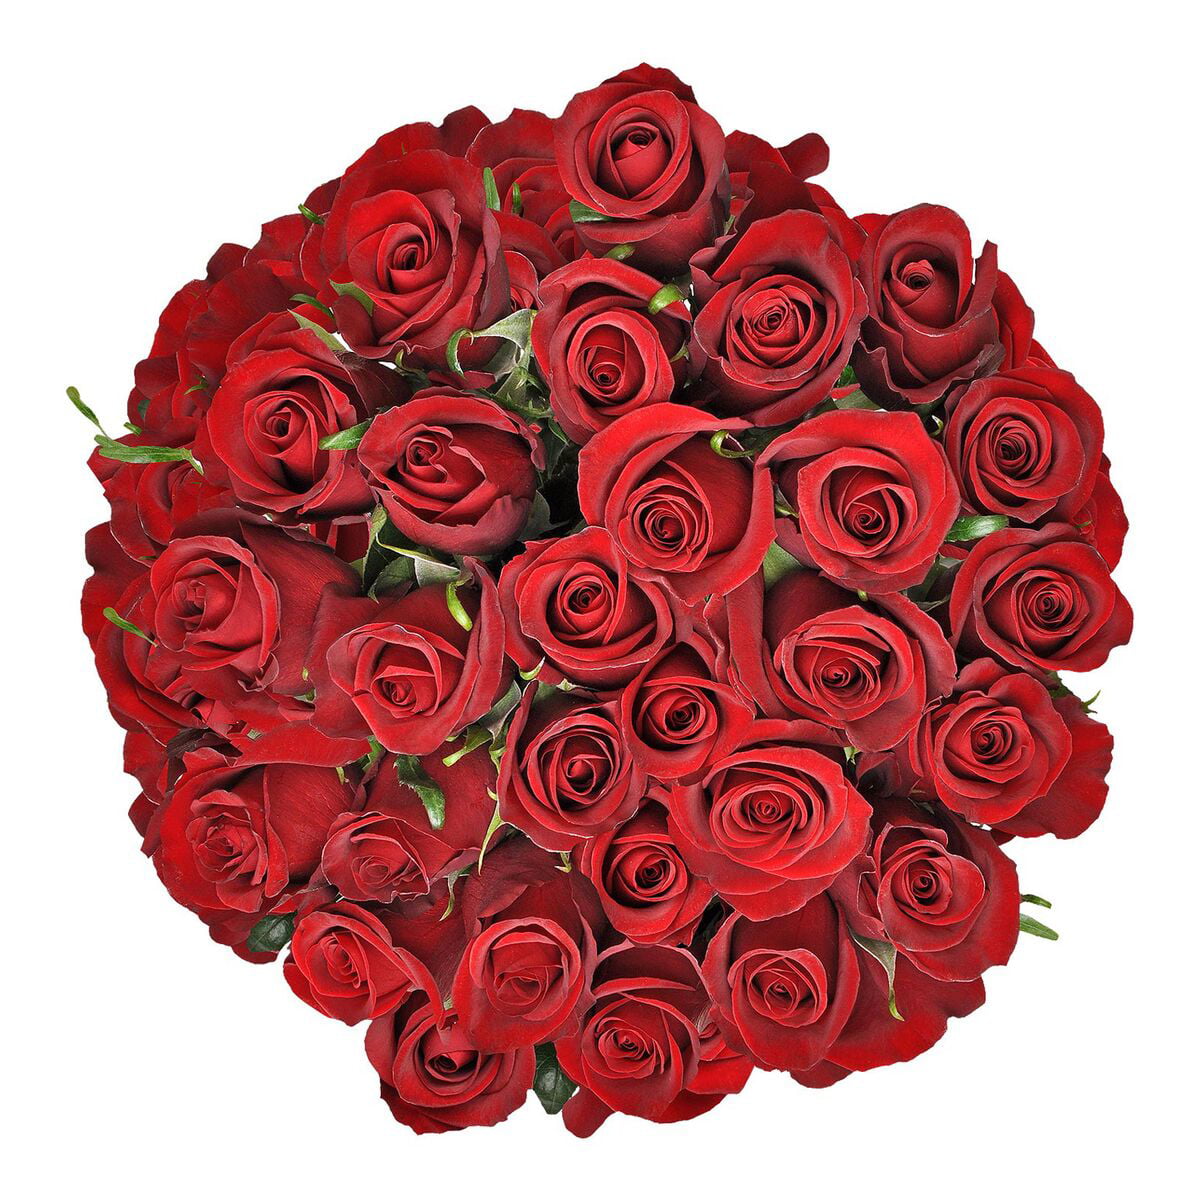 50 Red Roses with Crown bouquet - VBQ006 - Ideal Florist & Gift Shop